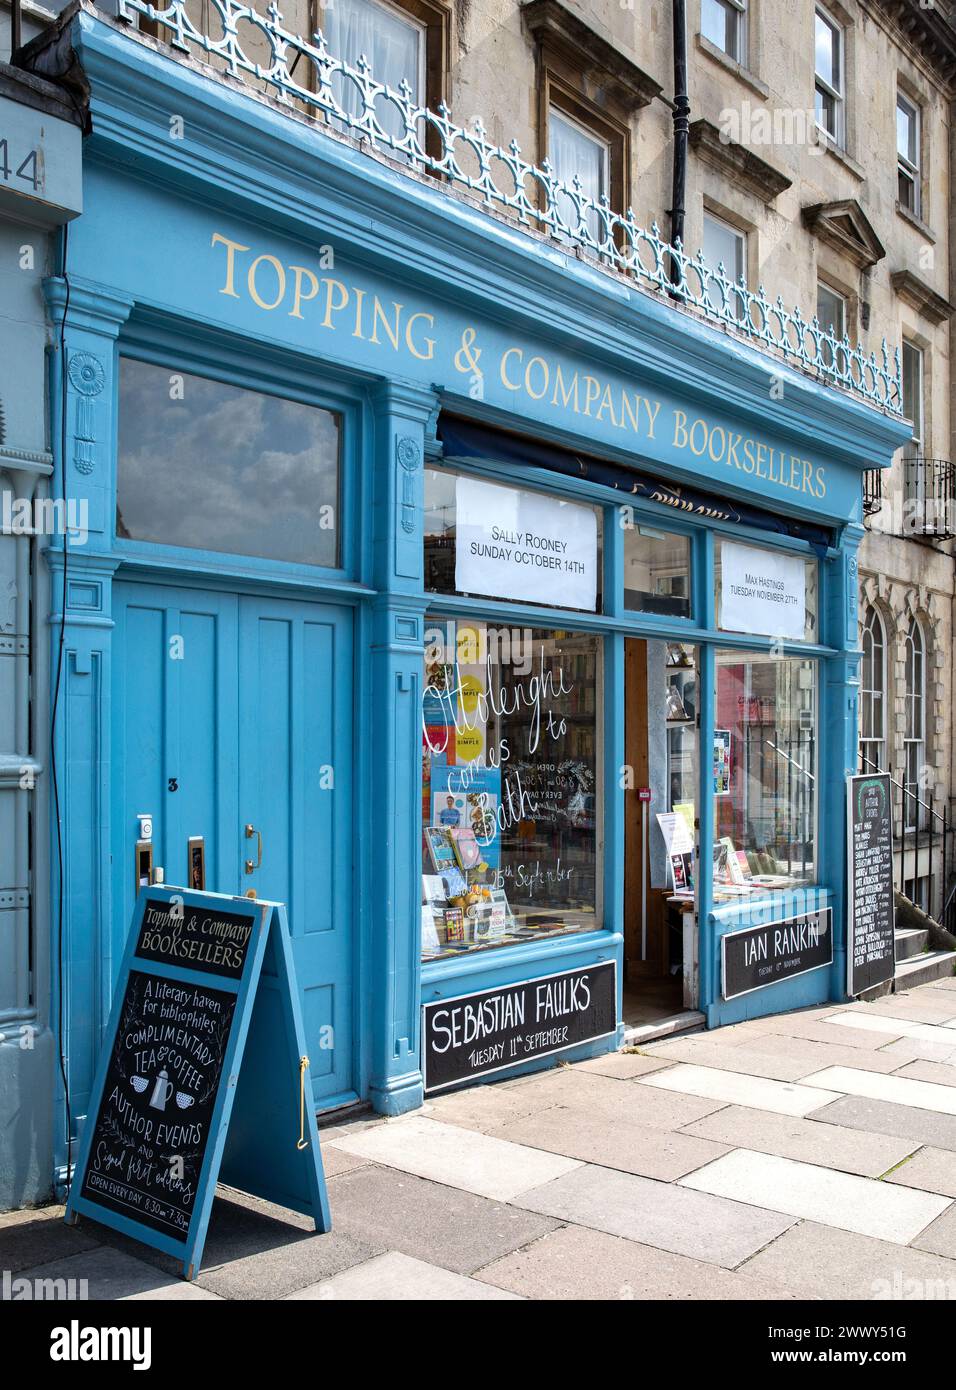 Former premises of the renowned Topping and Company Booksellers in the City of Bath Somerset UK visited by famous authors and customers alike Stock Photo